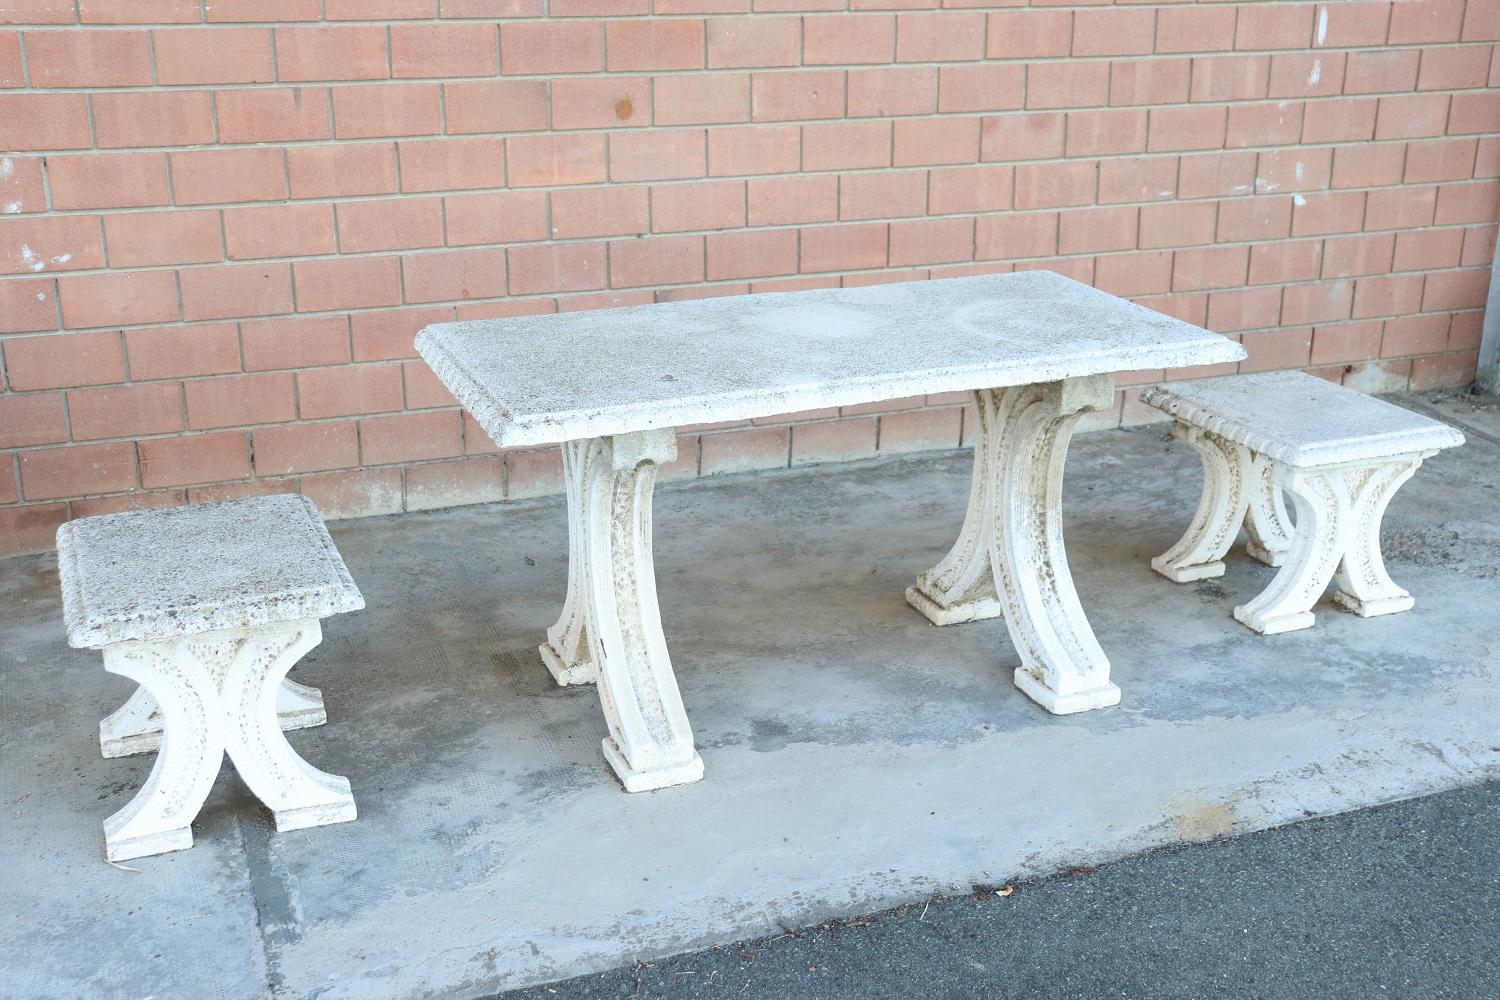 Beautiful refined garden set, circa 1920s main material stone mixed with gravel and cement. Beautiful rectangular table with two stools. The stone shows signs of the passage of time, two defects of wear on the table top, see photo details. This